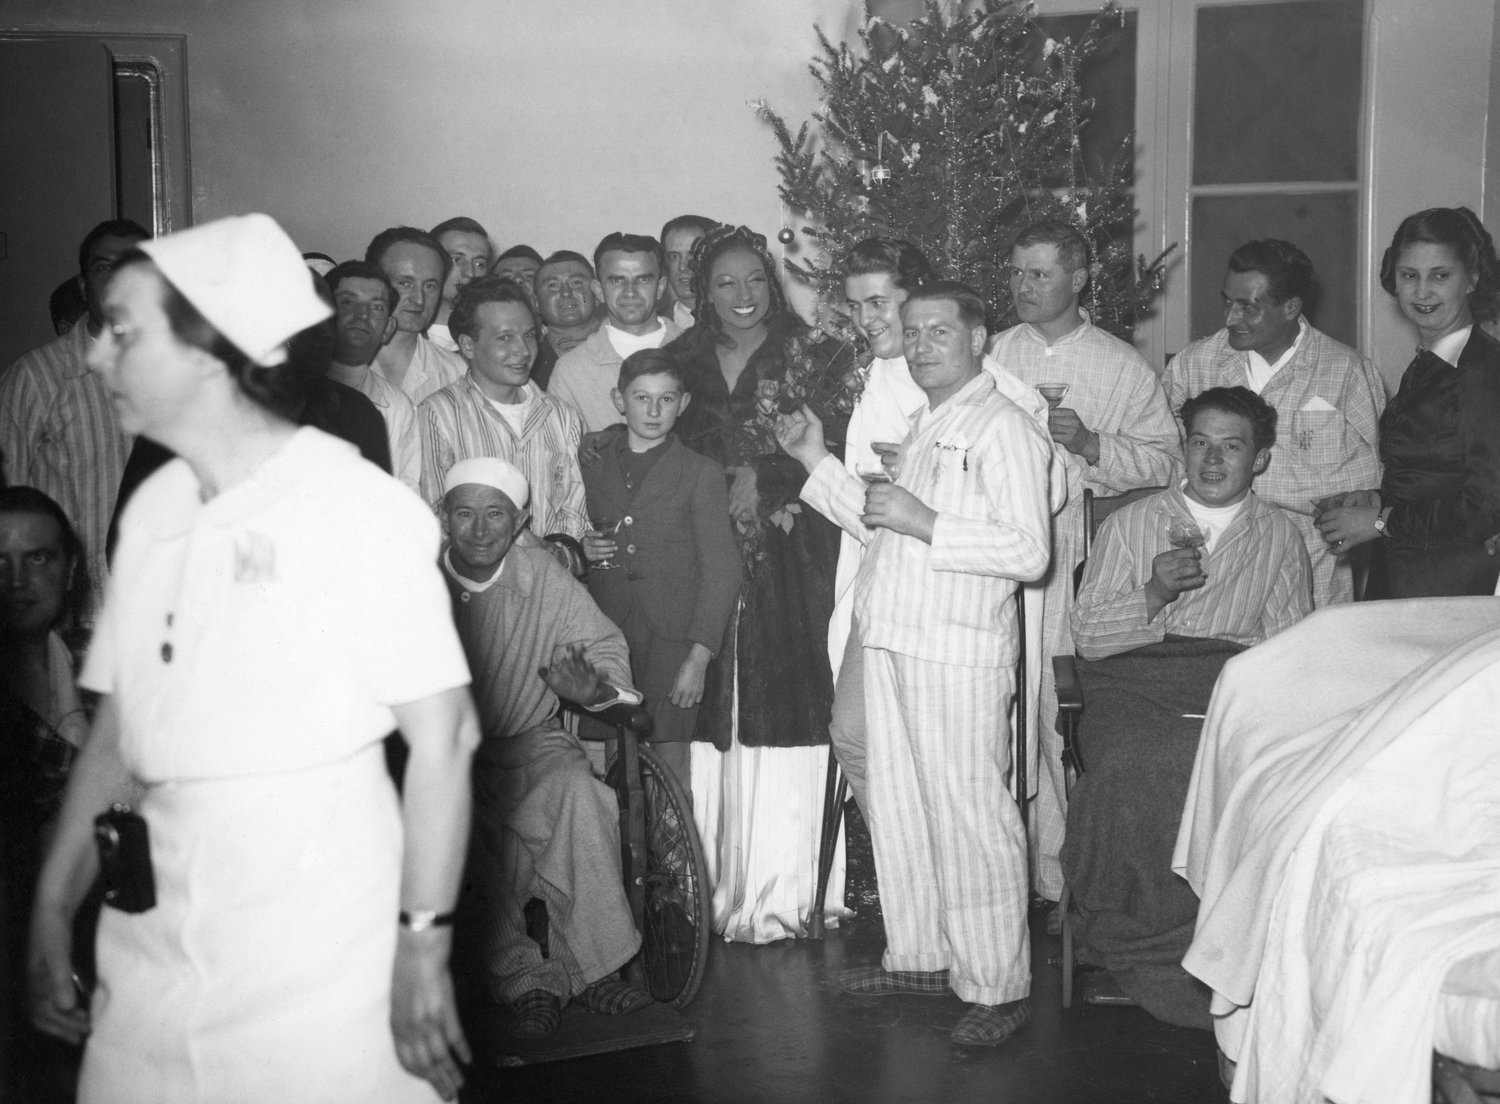 FILE - Josephine Baker with patients at a American hospital in Paris, France, where she sang for French soldiers on Christmas Day, Dec. 25, 1939. France is inducting Josephine Baker ‚Äì Missouri-born cabaret dancer, French Resistance fighter and civil rights leader ‚Äì into its Pantheon, the first Black woman honored in the final resting place of France's most revered luminaries. (AP Photo, File)